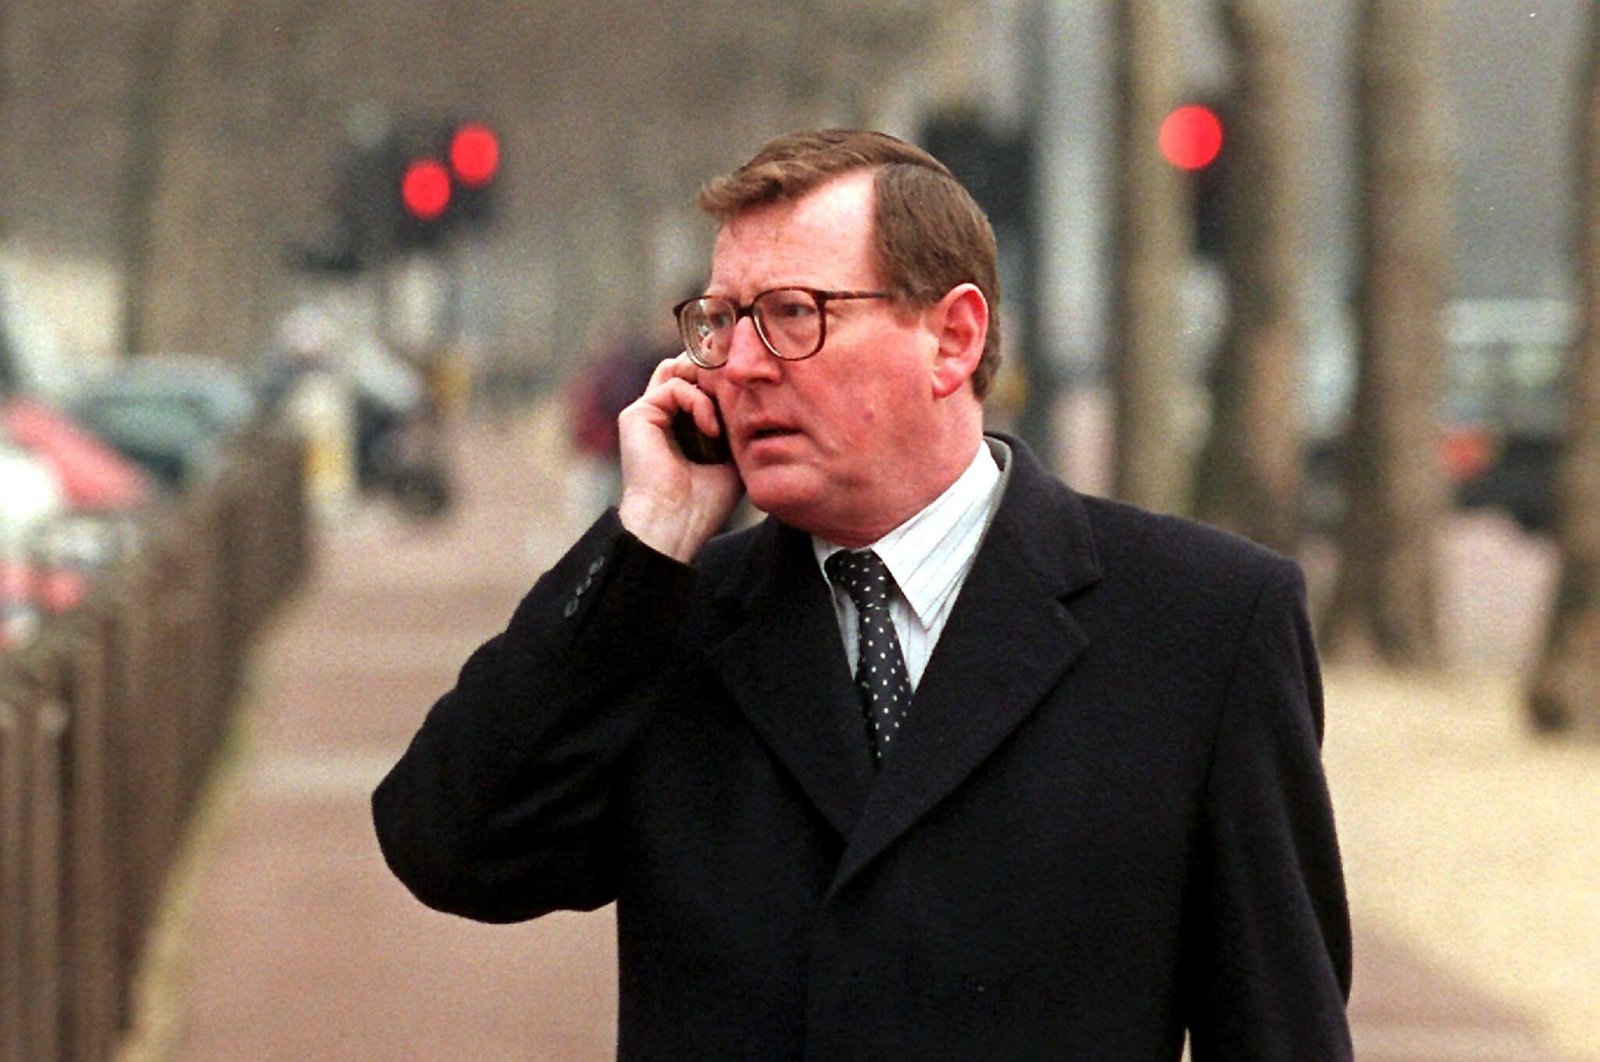 Ulster Unionist Party leader David Trimble makes a mobile phone call in The Mall on his way to the final day of the all-party Northern Ireland peace talks at Lancaster House, London, Britain, Jan. 28, 1998. (EPA Photo)